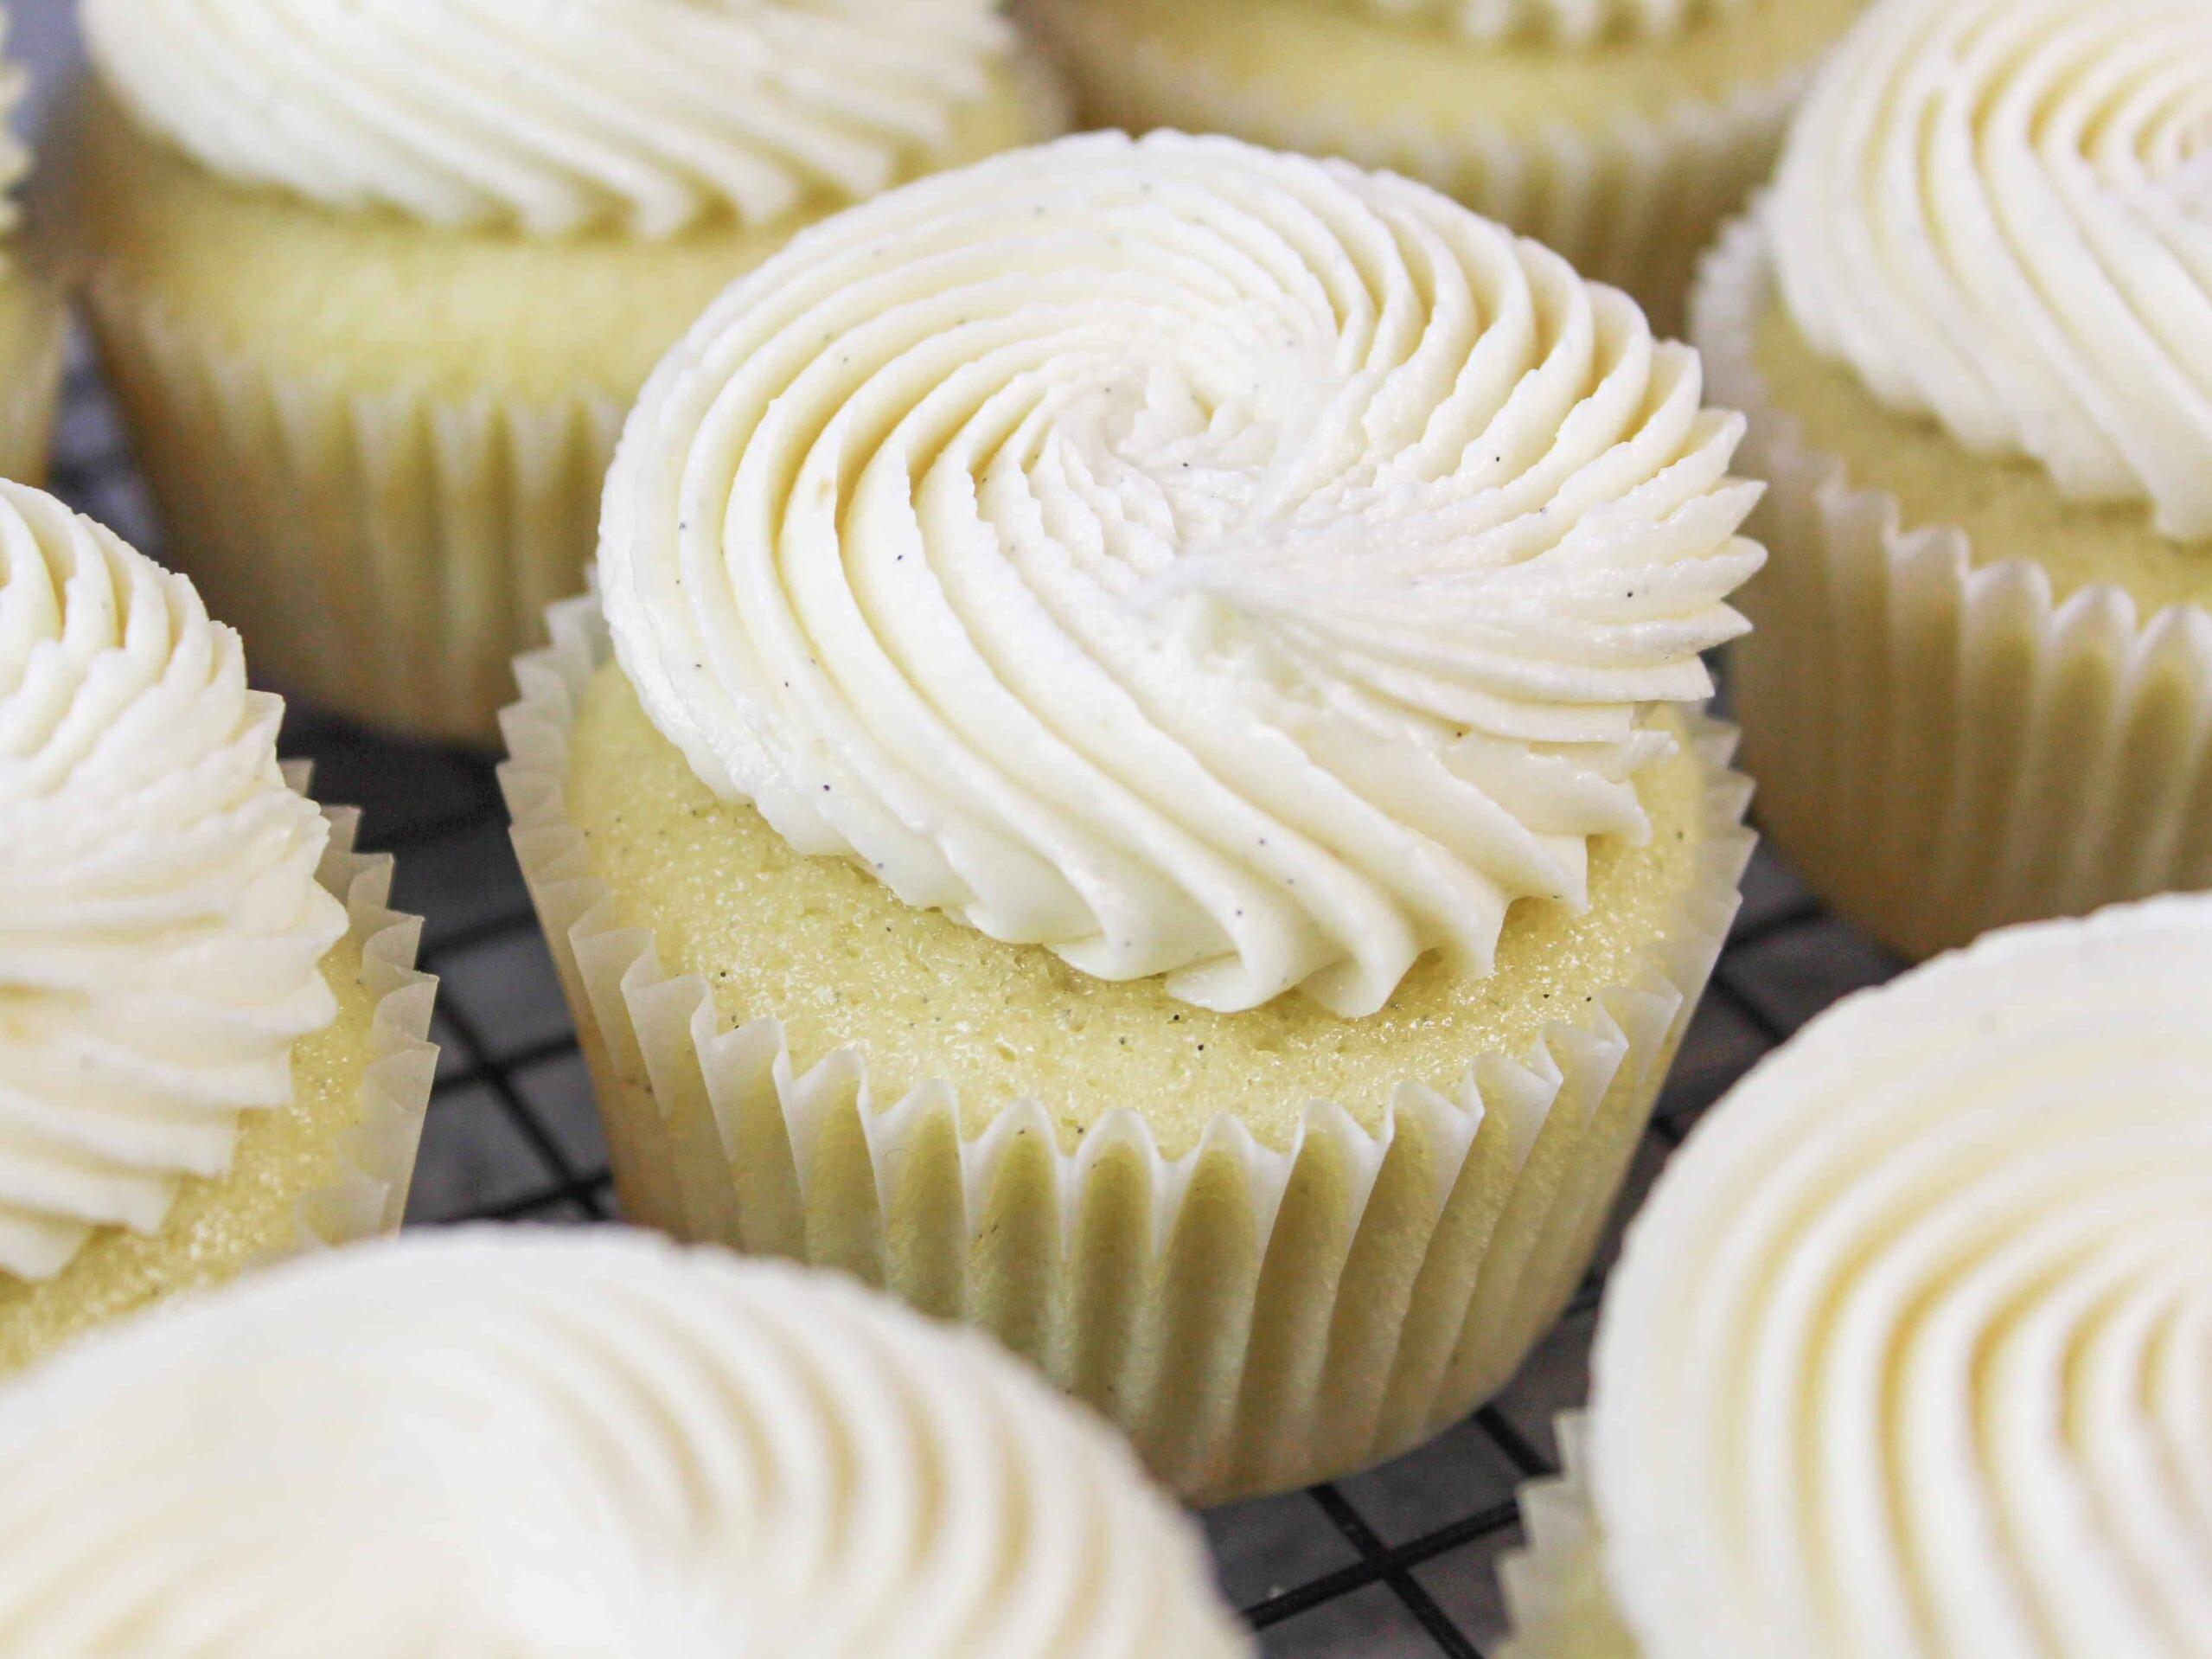  Moist and flavorful, these Dairy-free Vanilla Cupcakes are the way to go.